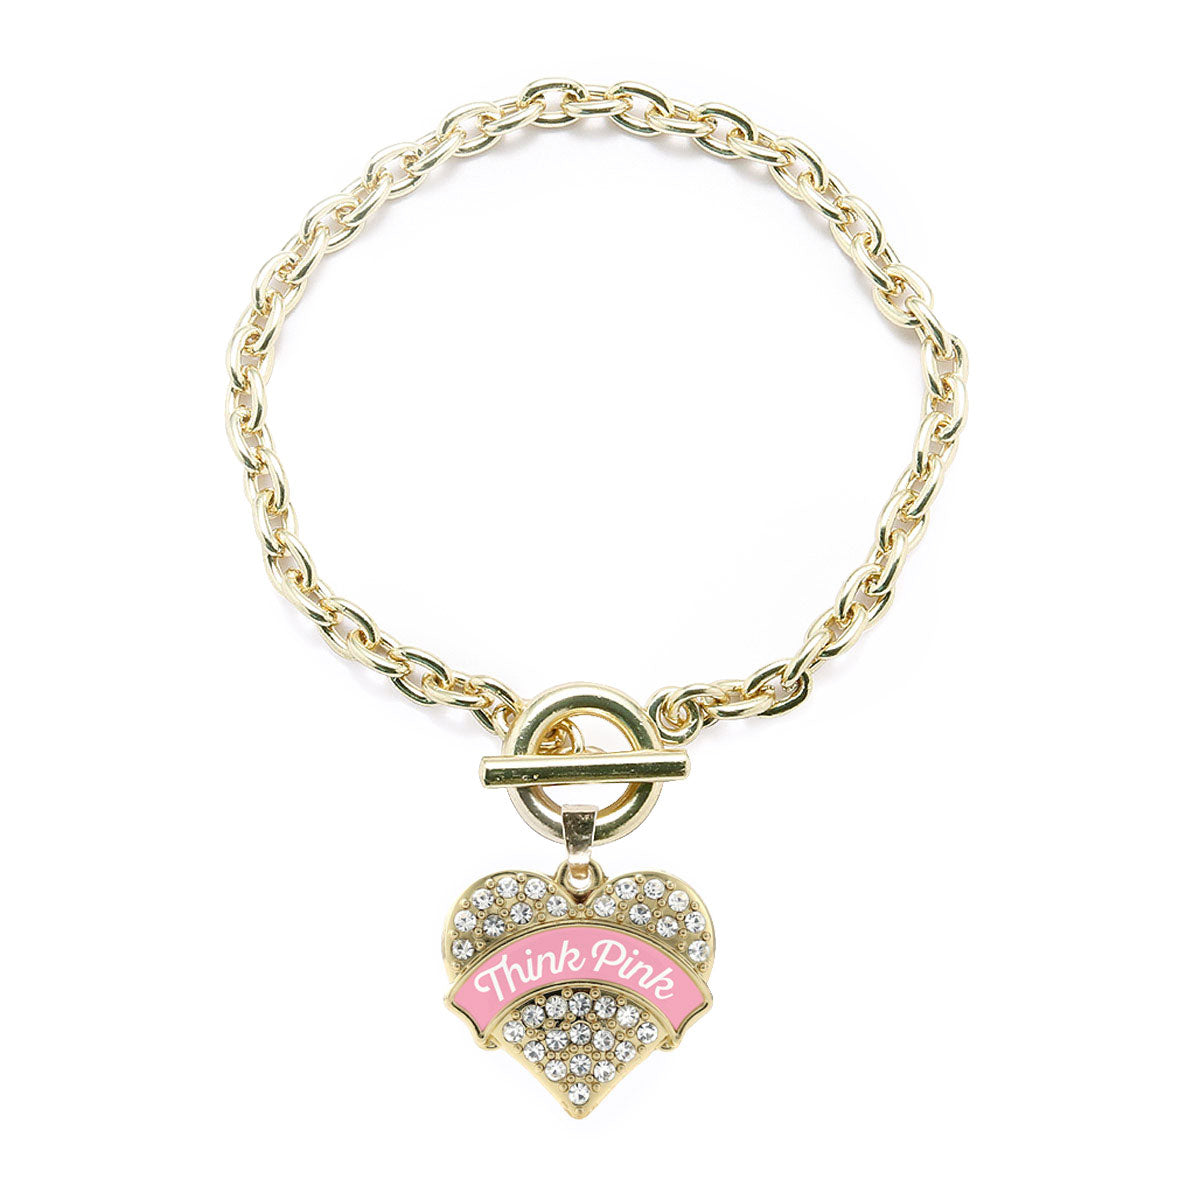 Gold Think Pink Breast Cancer Support Pave Heart Charm Toggle Bracelet